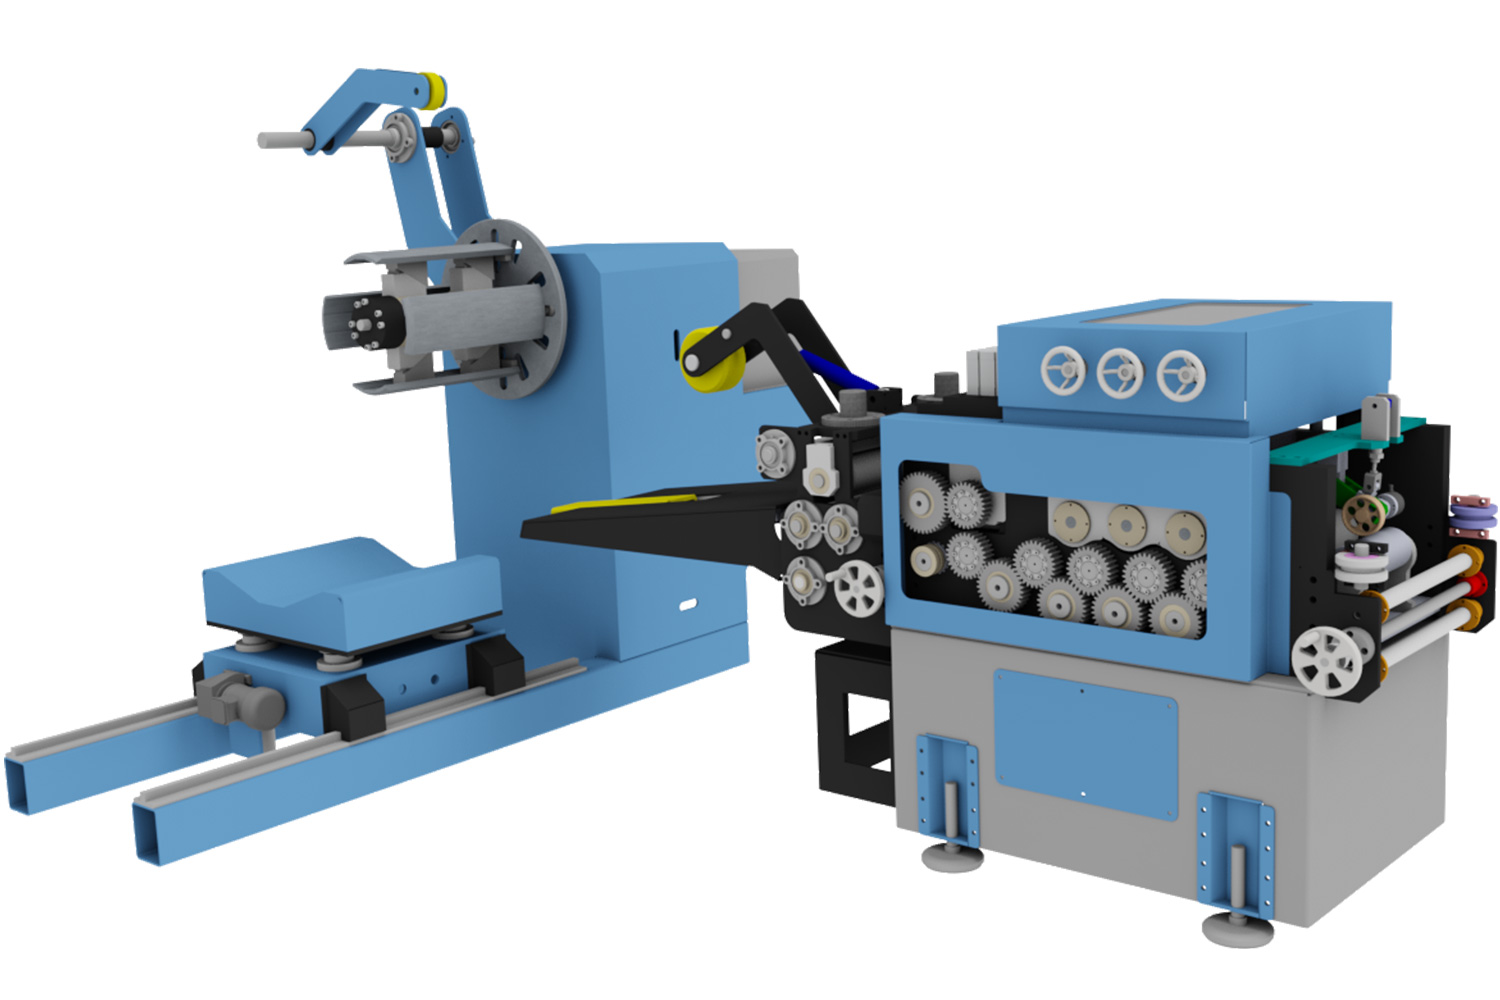 Press Feeding Lines || Trazor Machine | Drivers (Press Feeding), Rectified Mini Driver, Compact Drivers, Roll Uncoiler, Custom Design Press Drivers, Rollform, Cartesian Transfer Robots, Conveyors, Assembly Machines, Factory Automation, Profiles